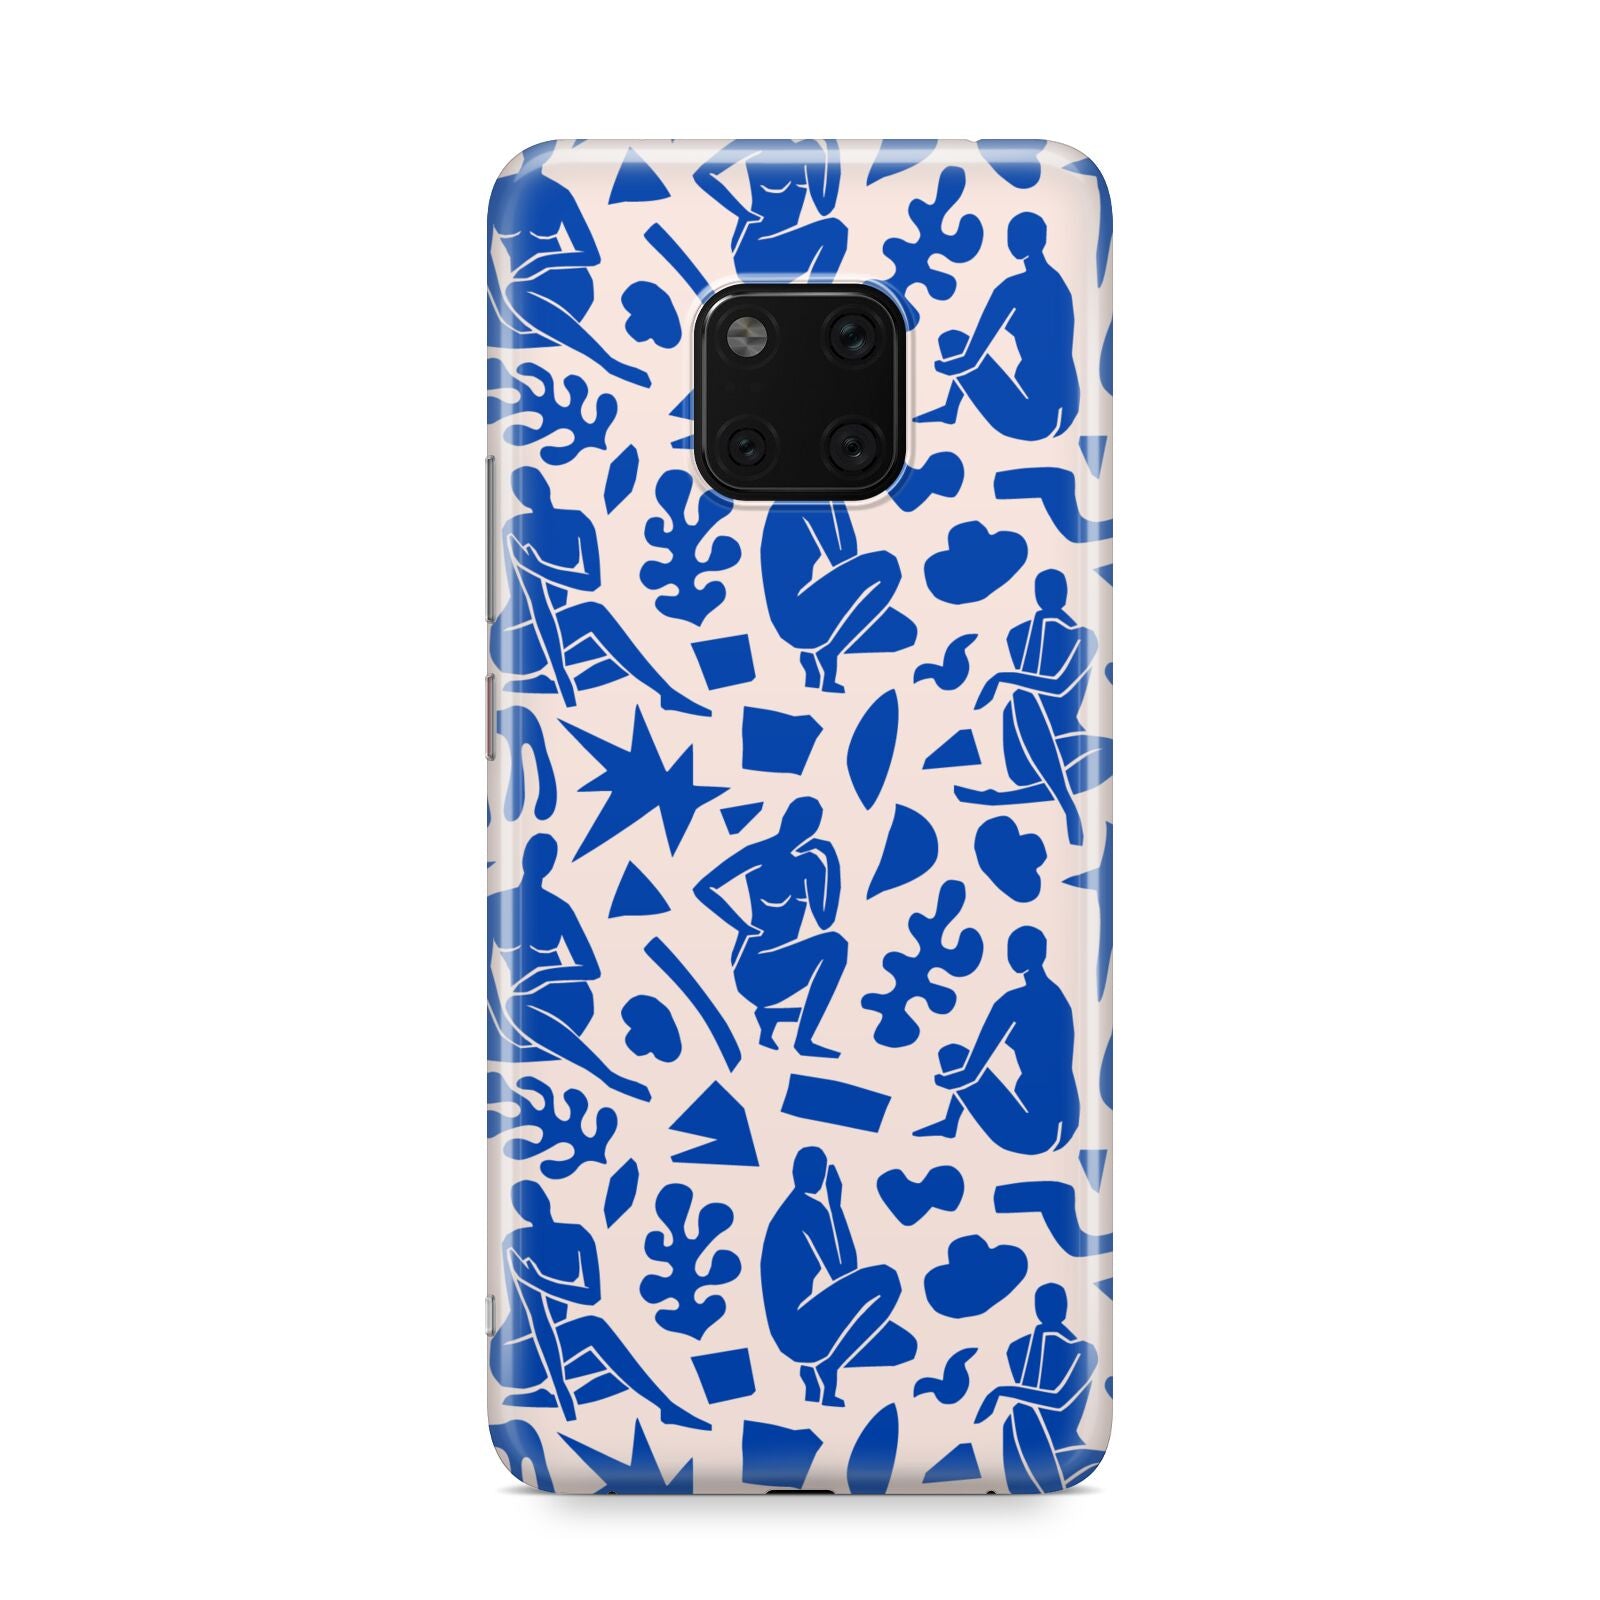 Abstract Art Huawei Mate 20 Pro Phone Case